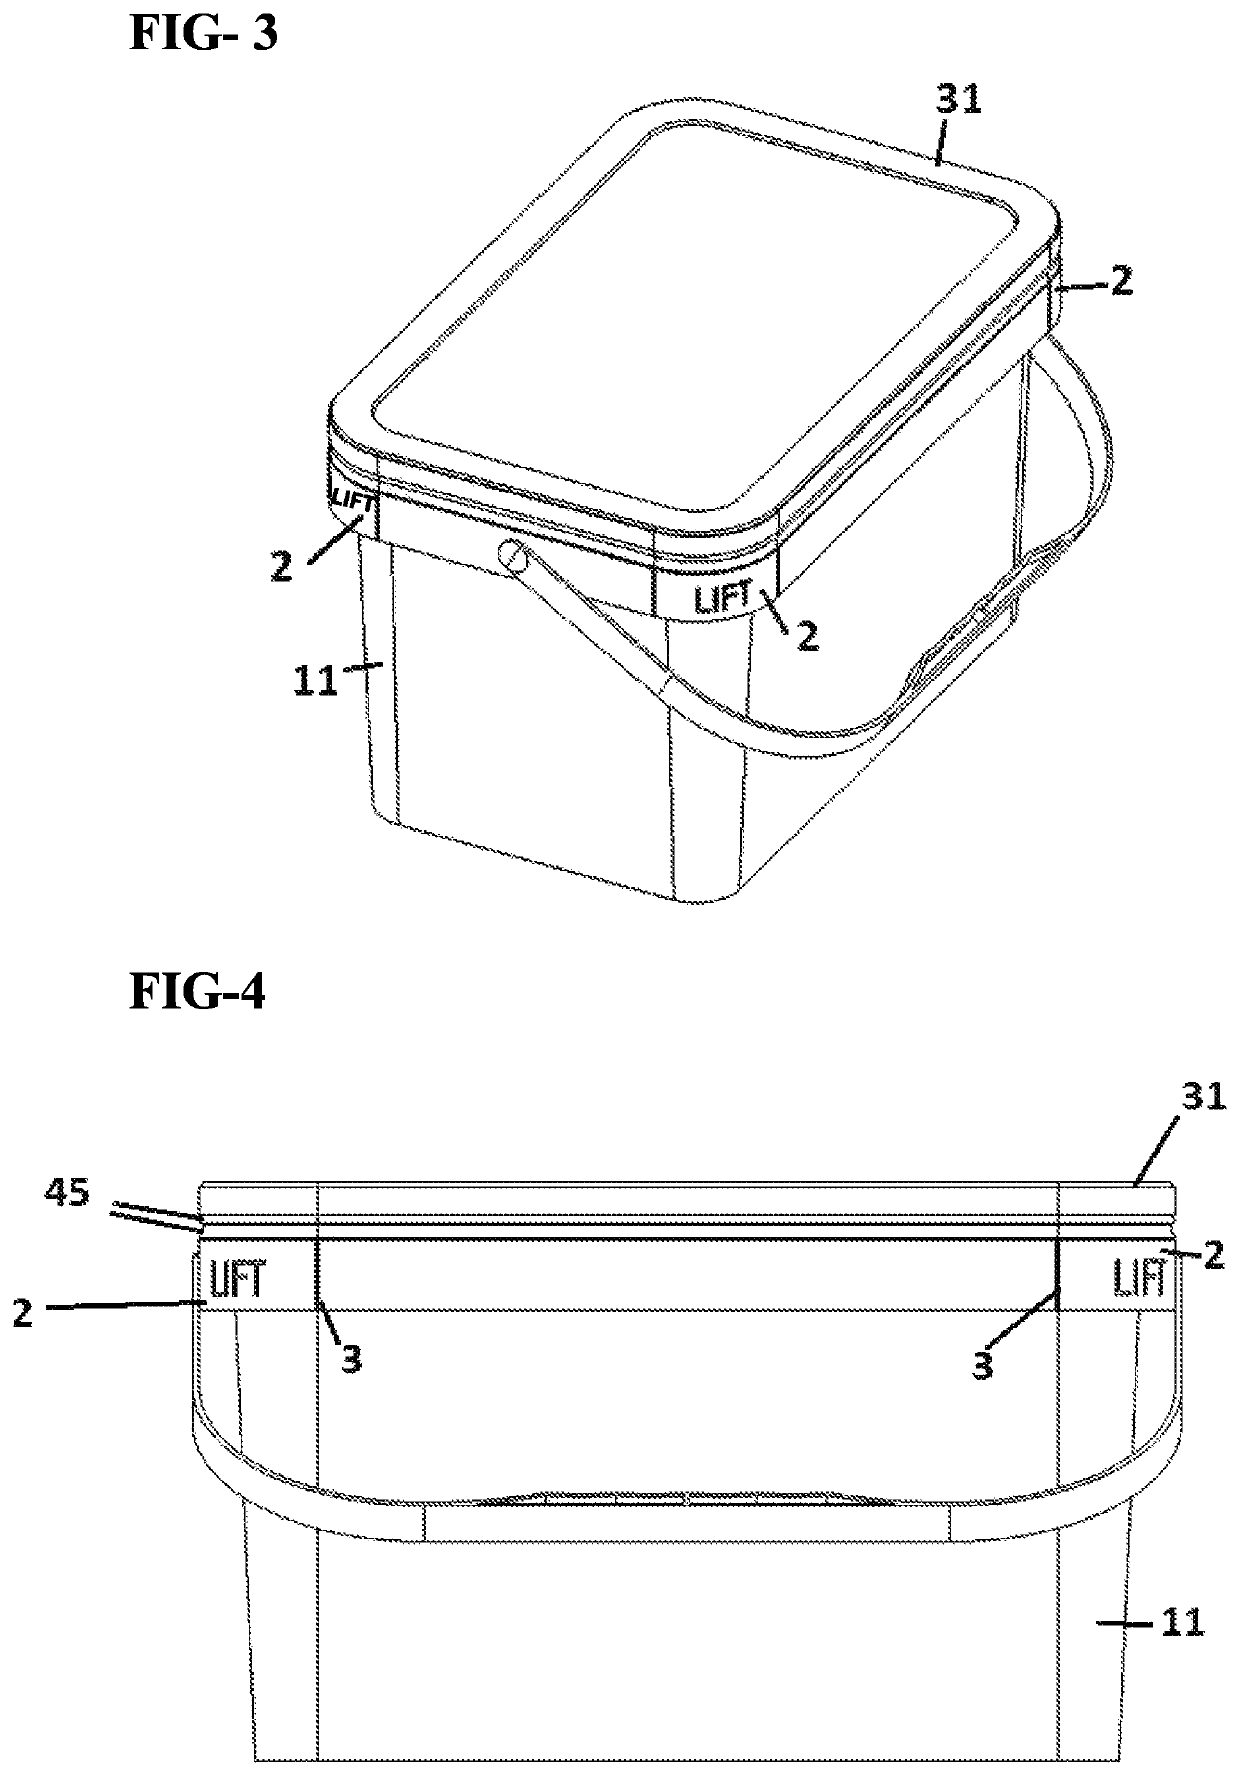 Plastic container body and container closure and carry handle grip / container leverage opening tool assembly